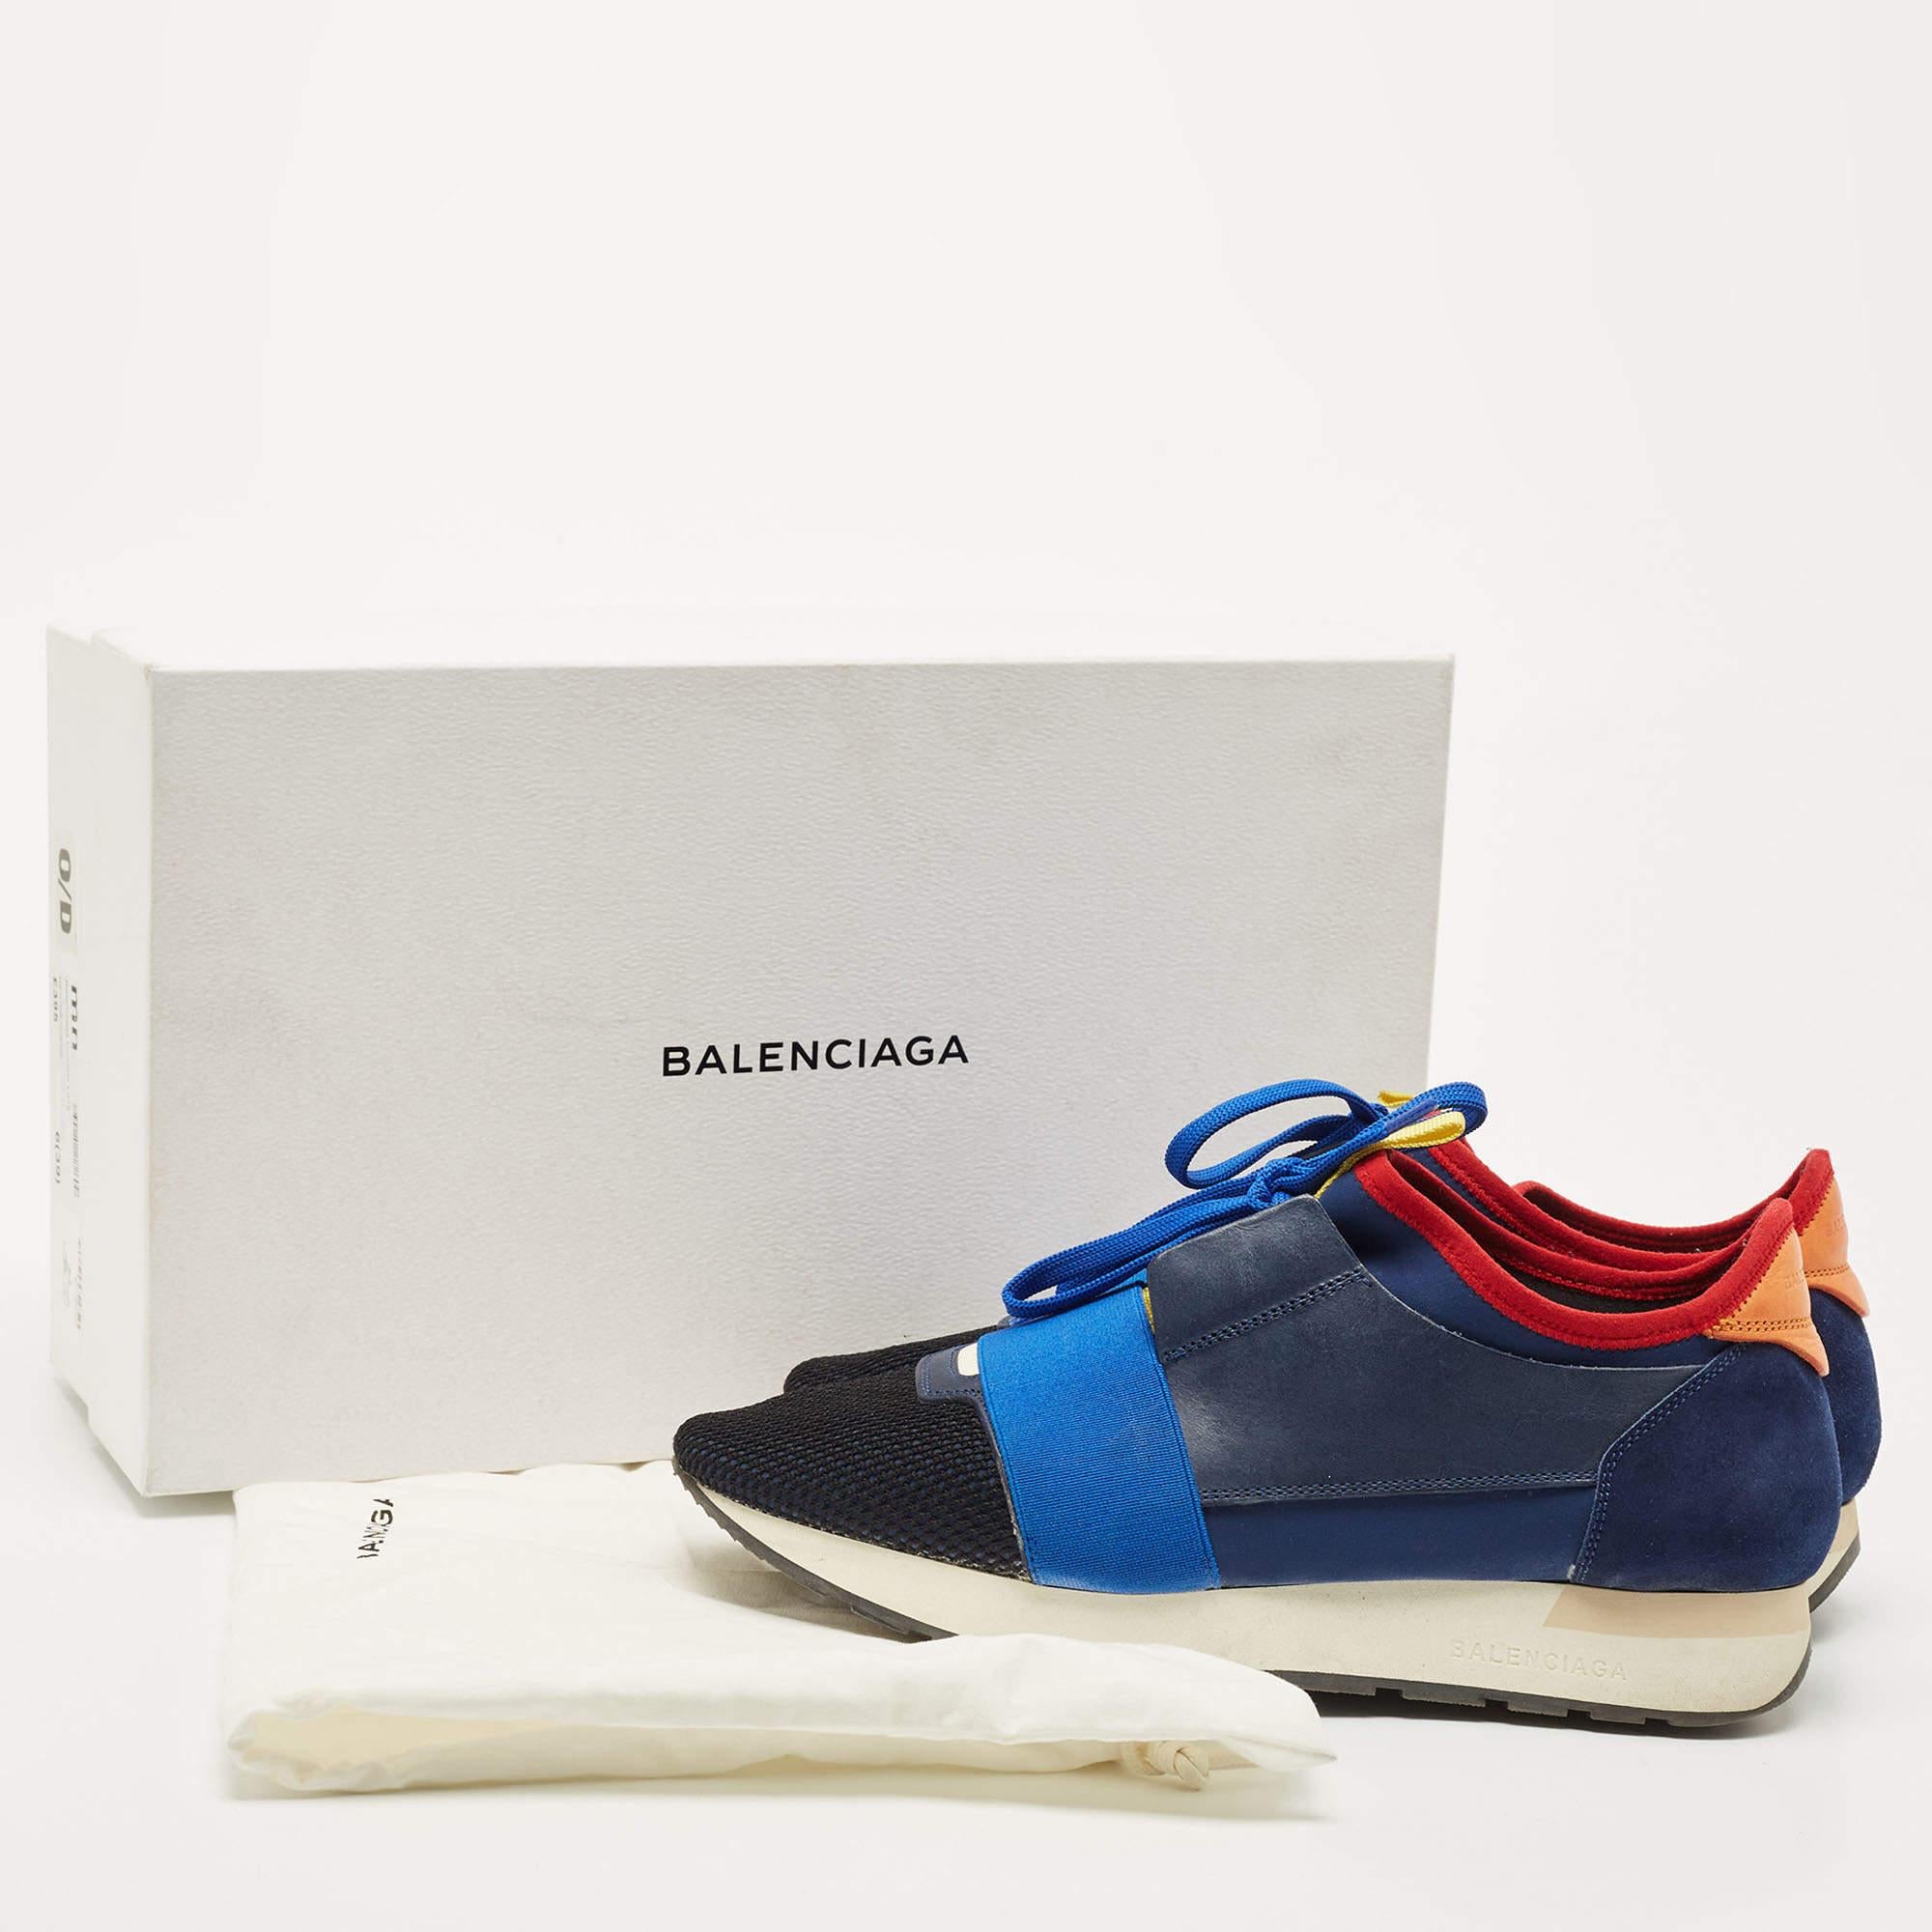 Balenciaga Multicolor Leather and Mesh Race Runner Sneakers Size 39 3